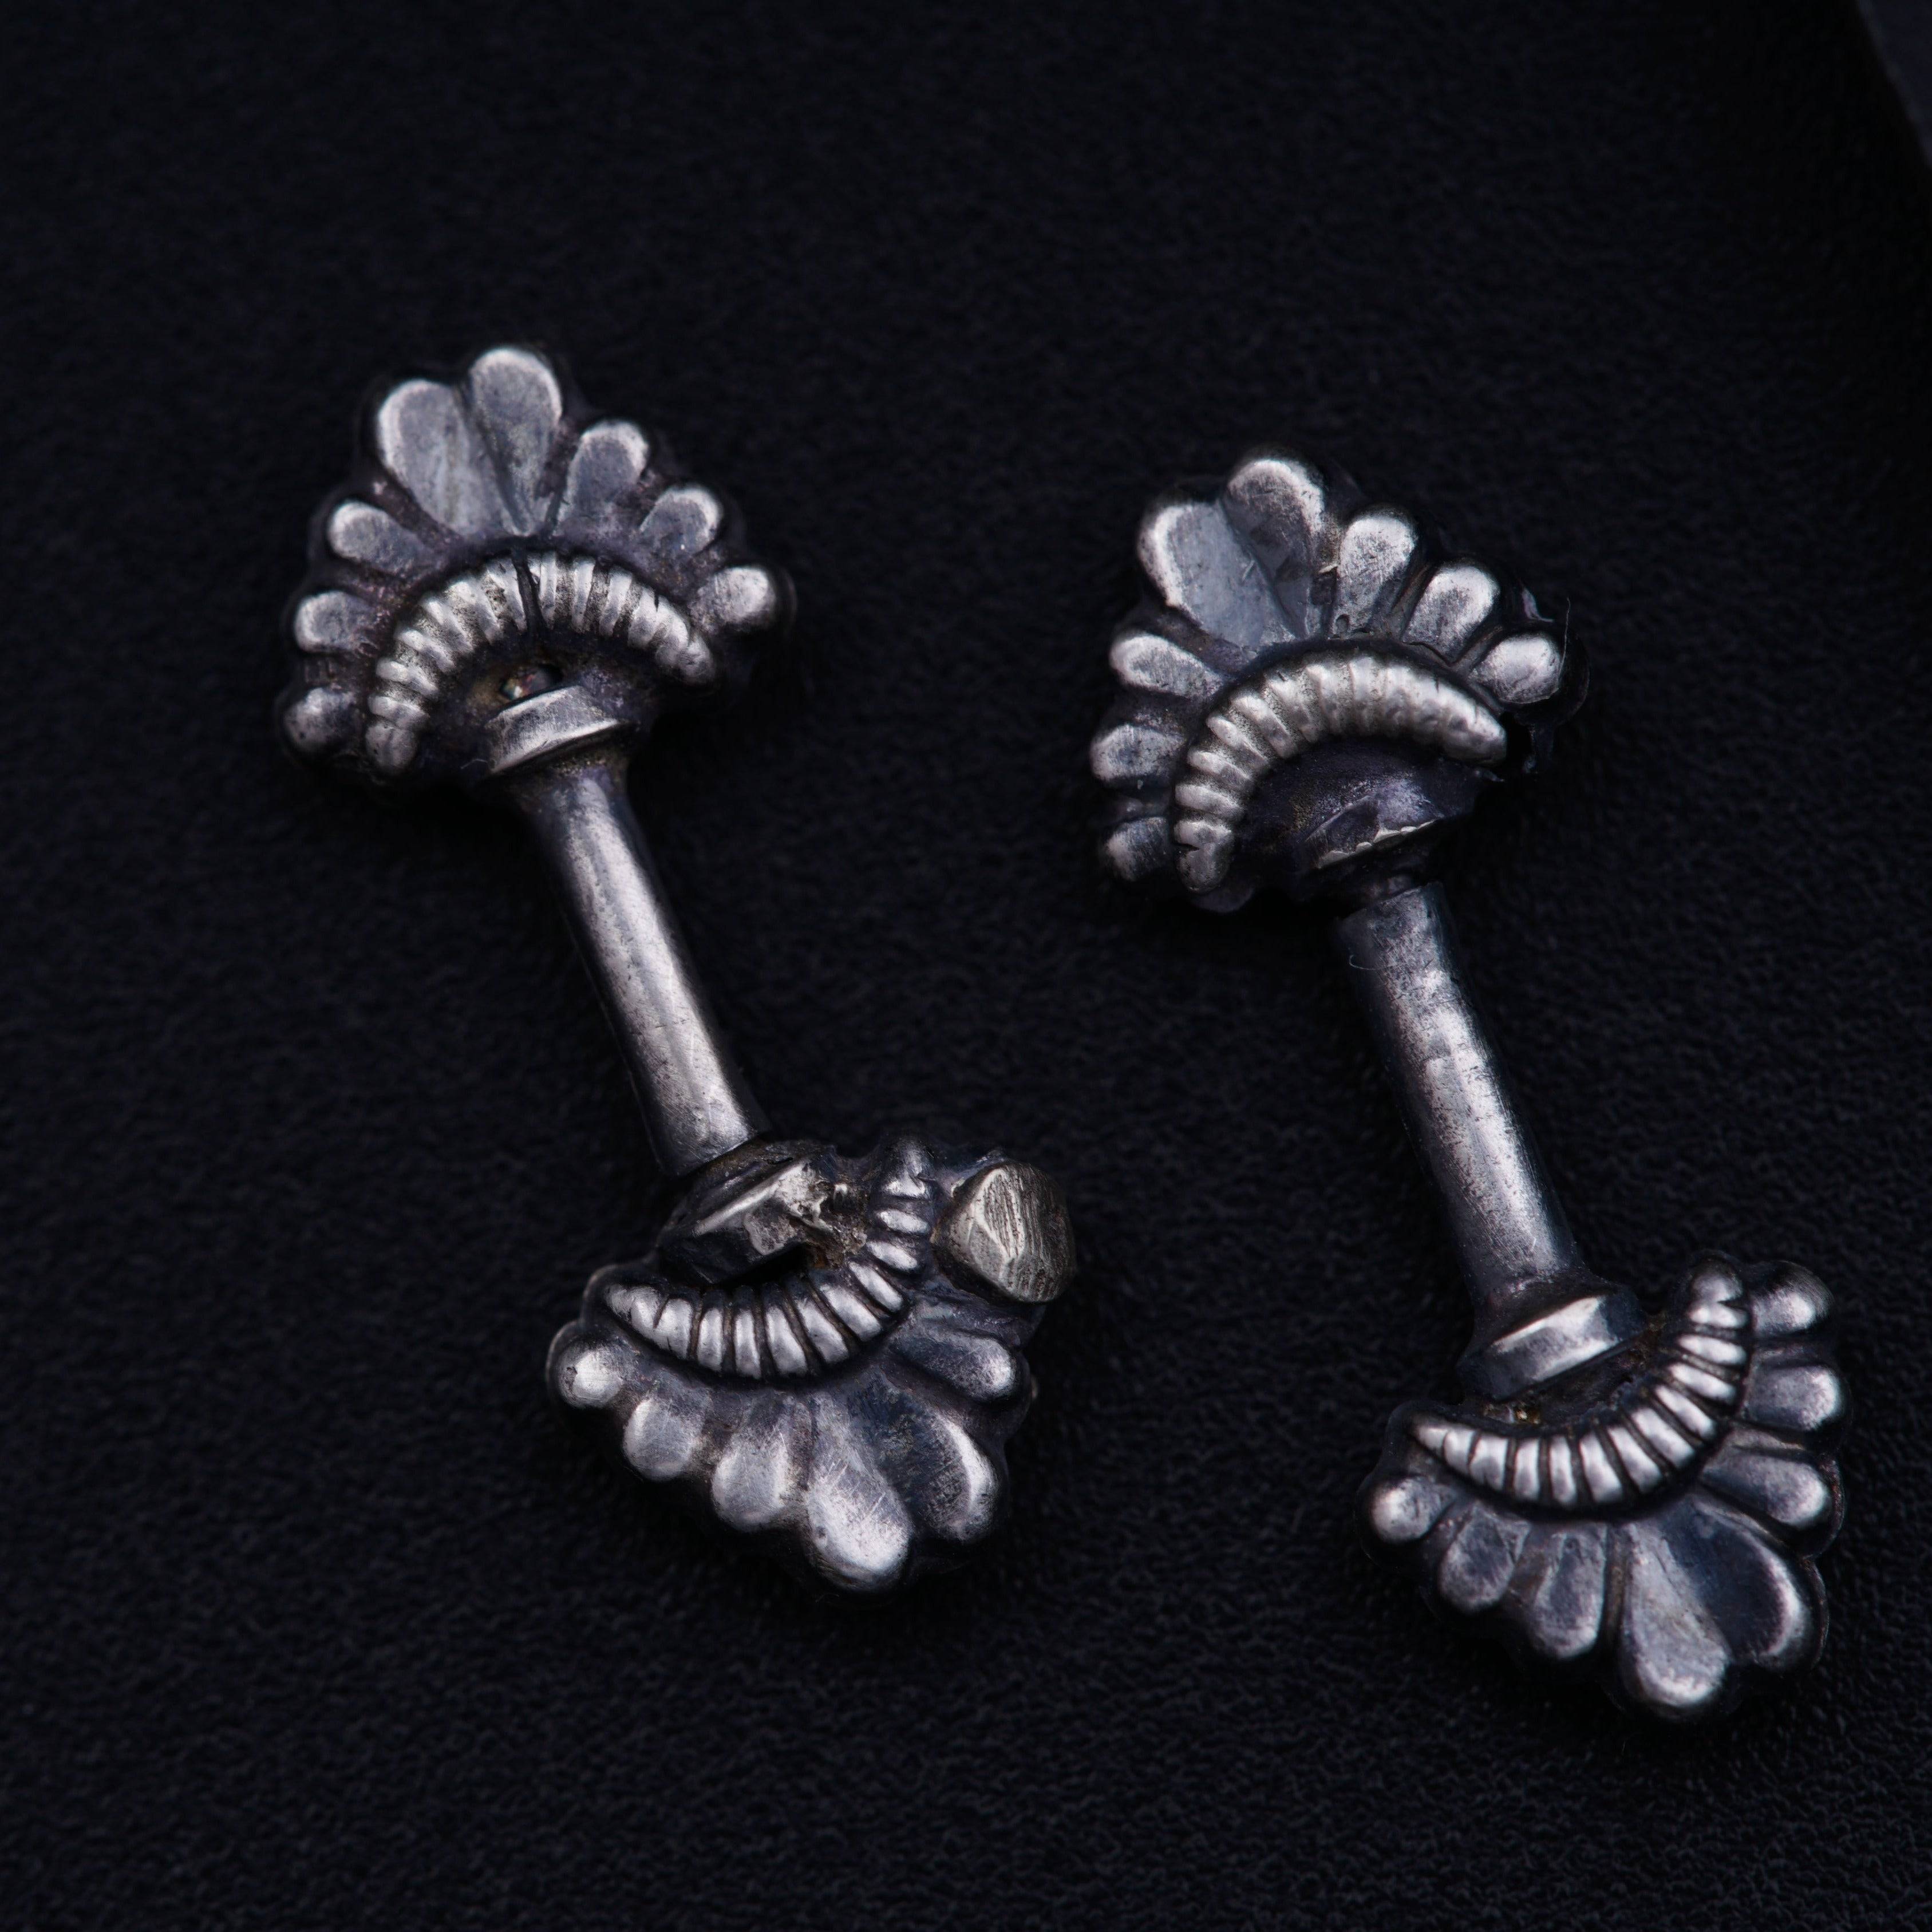 a pair of silver colored ear studs on a black background